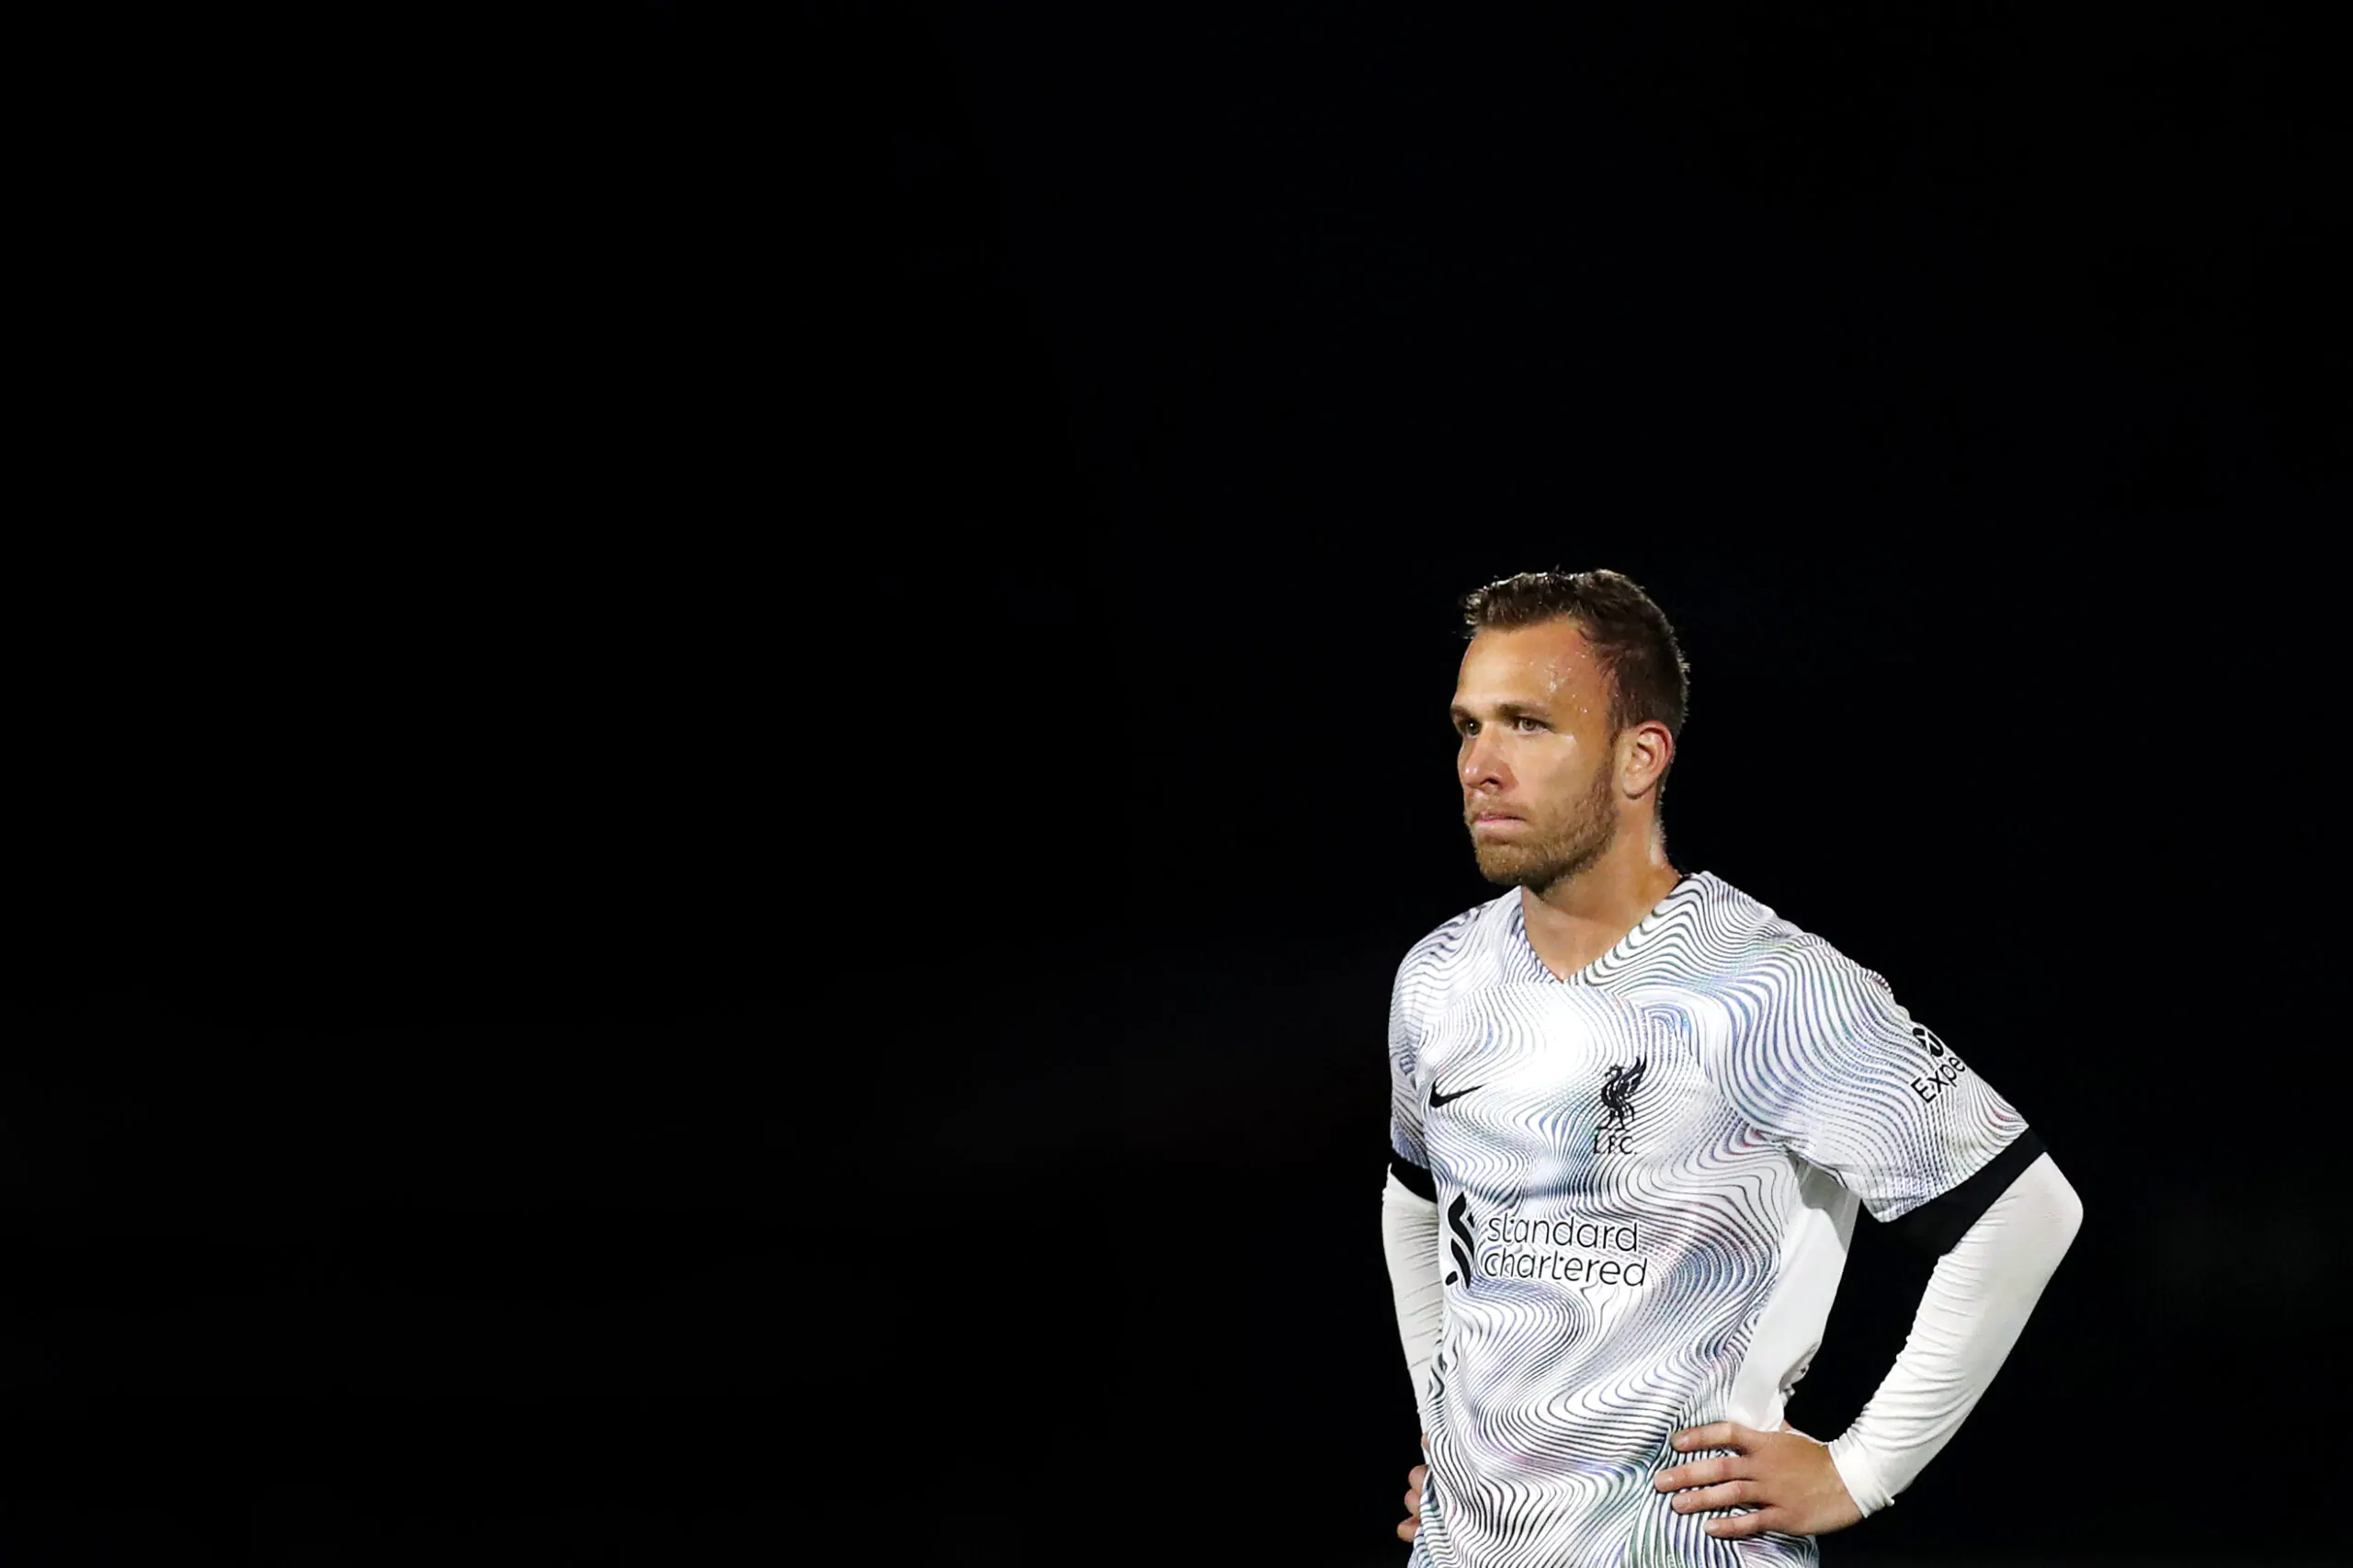 Juventus outcast Arthur hasn’t bounced back at Liverpool, as a major muscular injury knocked him out for multiple months.